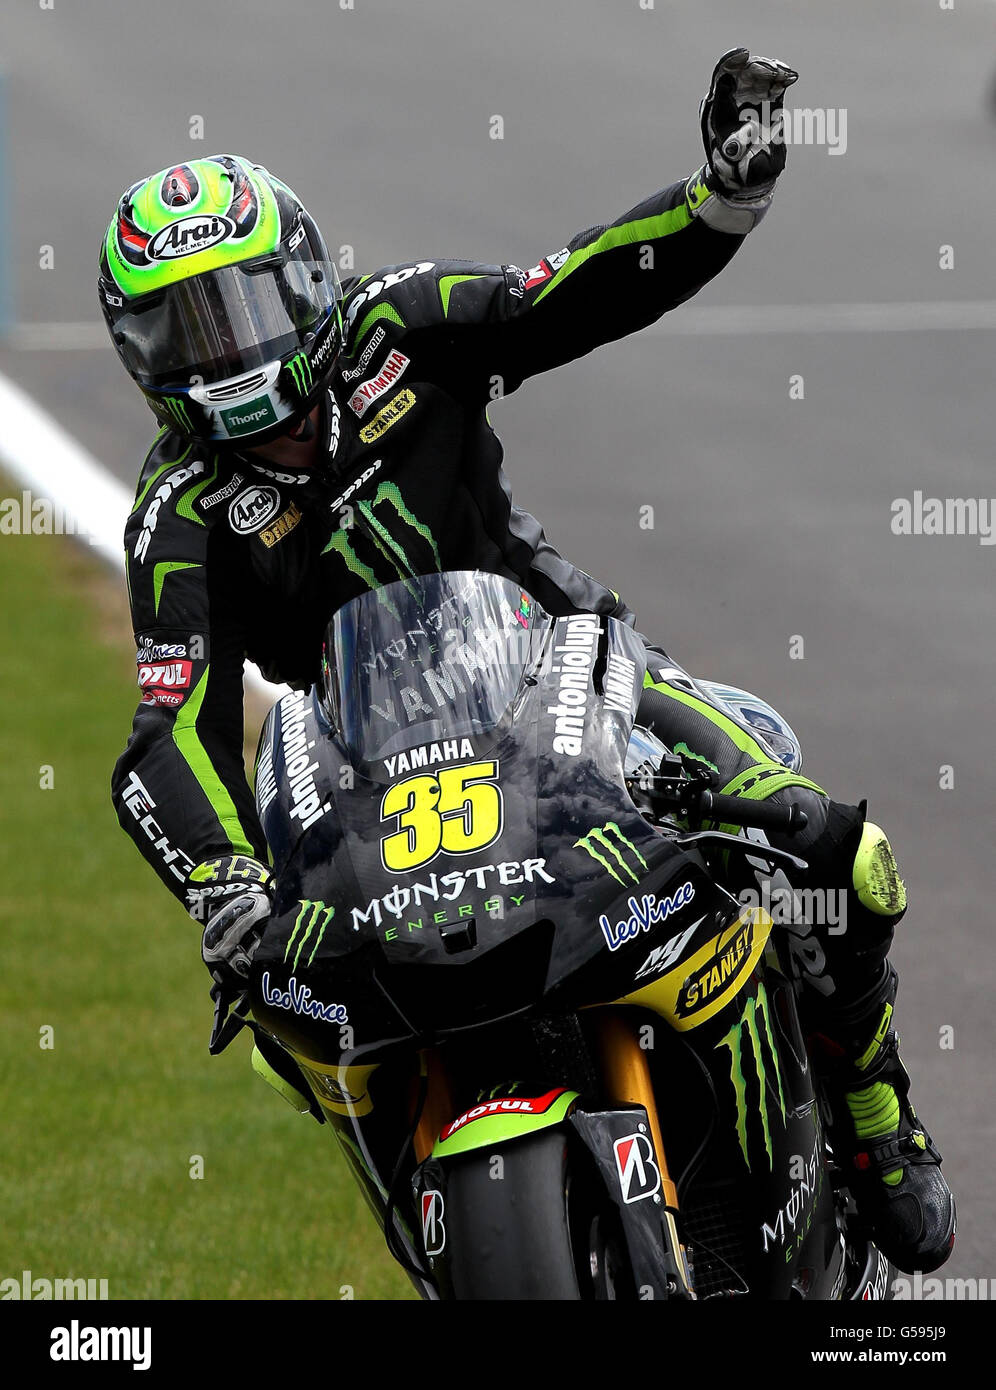 Motorcycling - 2012 Hertz British Grand Prix - Day Three - Race - Moto GP - Silverstone. Great Britain's Cal Crutchlow acknowledges the crowd after the British round of Moto GP at Silverstone Circuit, Northamptonshire. Stock Photo